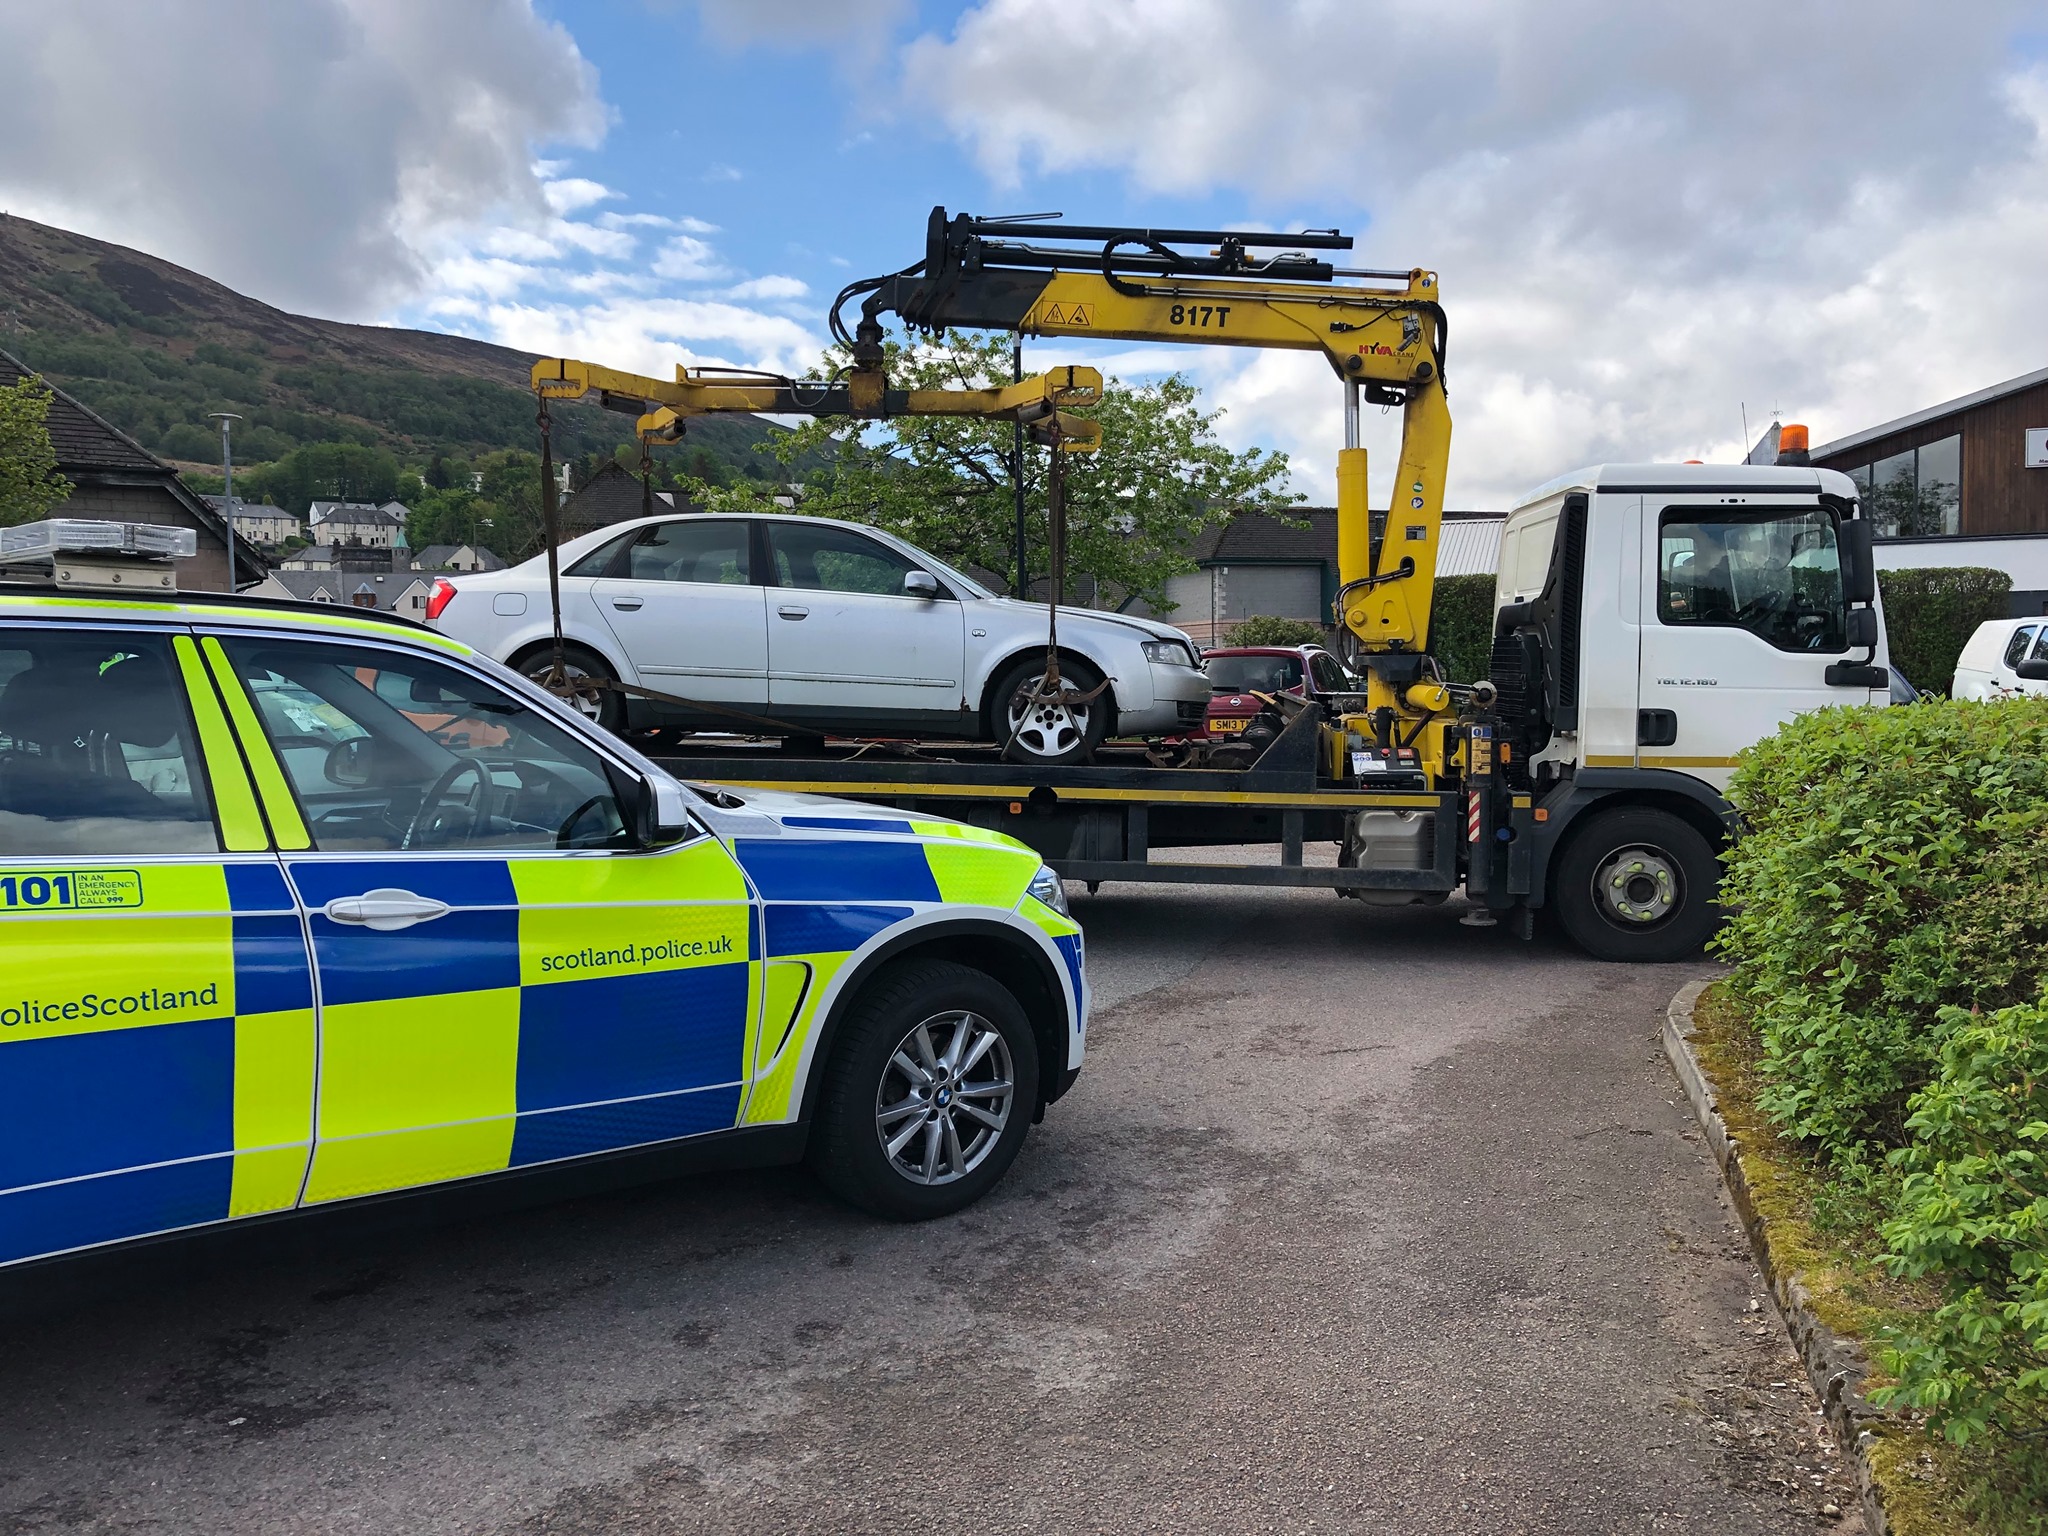 34 untaxed vehicles were discovered over course of the joint two-day operation between police and the DVLA